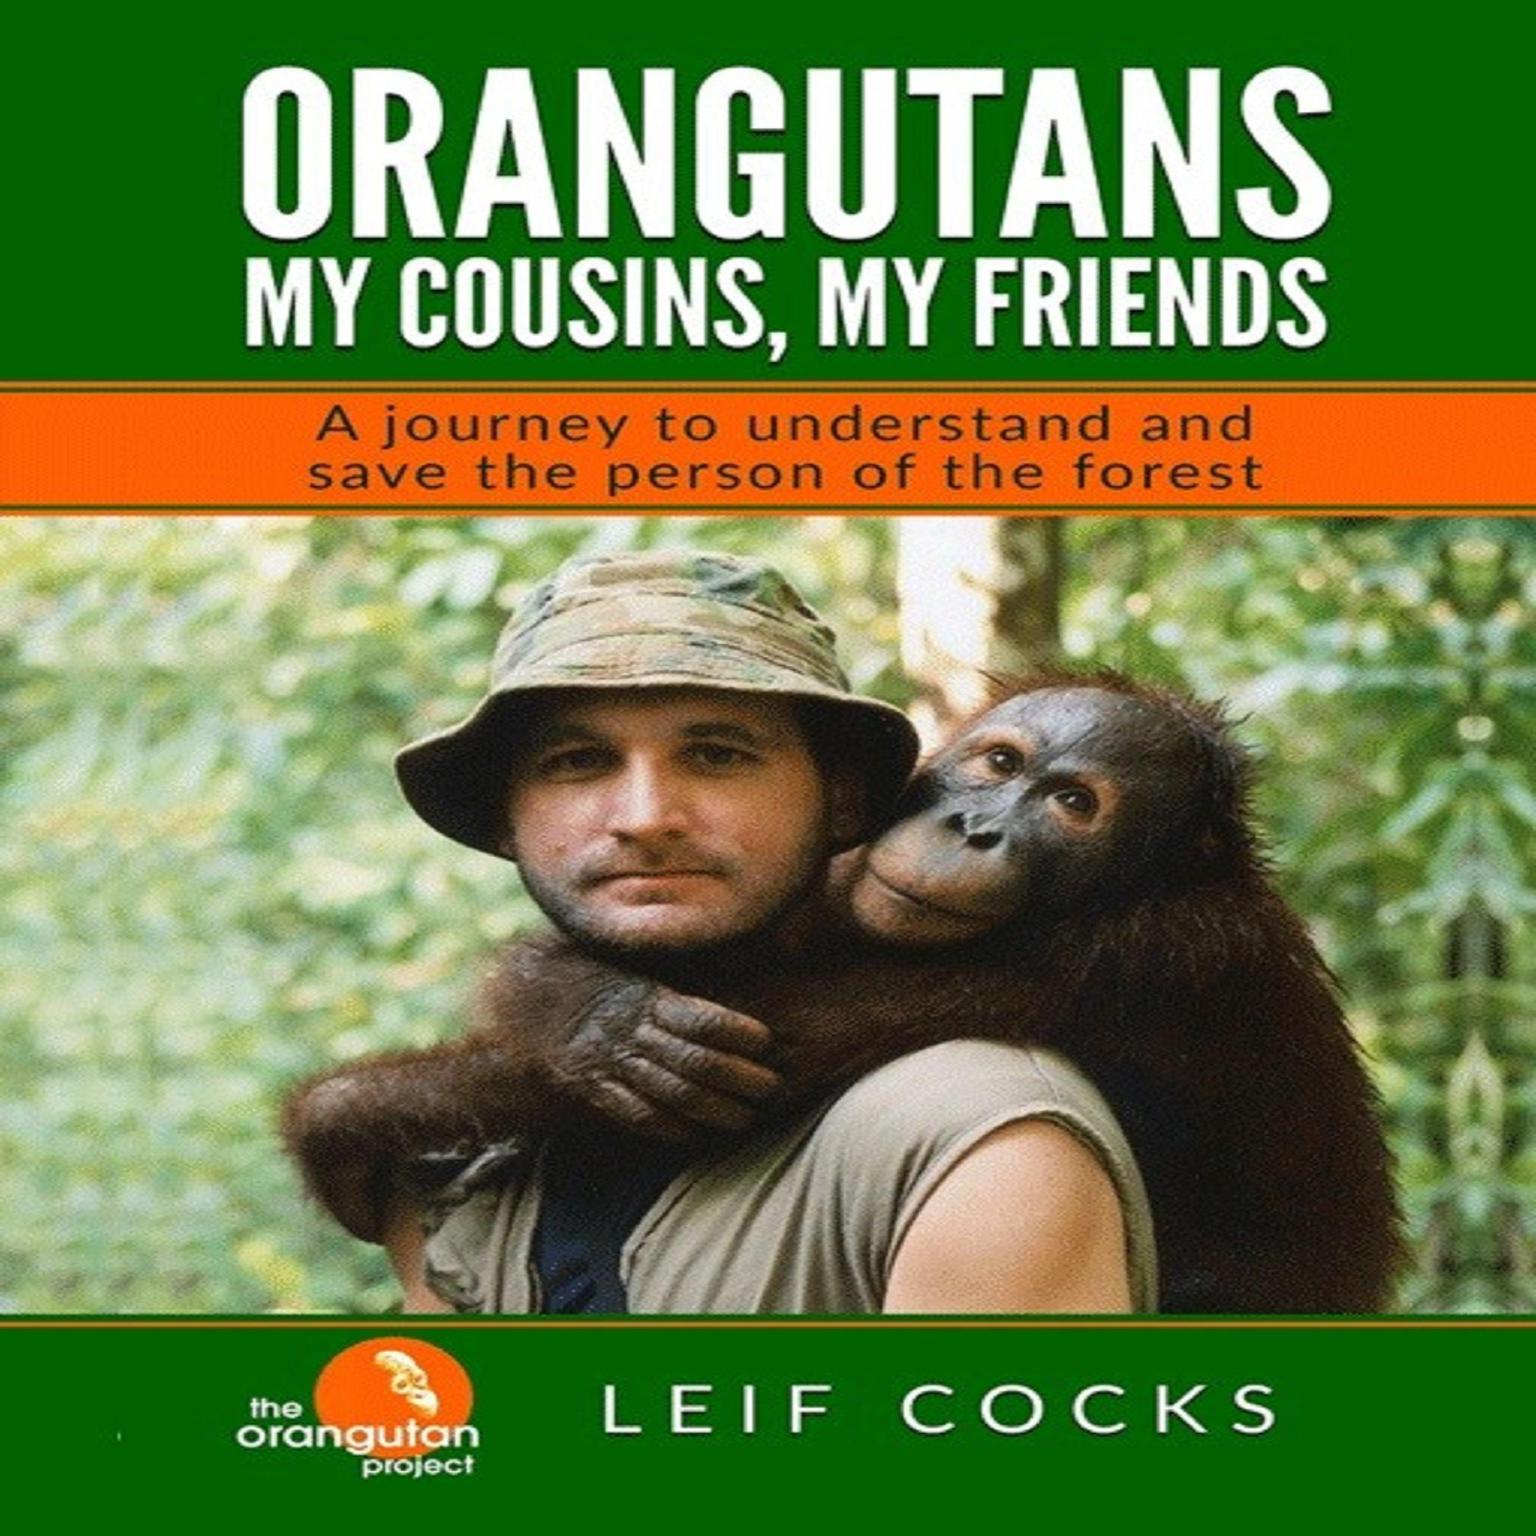 Orangutans: My Cousins, My Friends: A Journey to Understand and Save the Person of the Forest Audiobook, by Leif Cocks